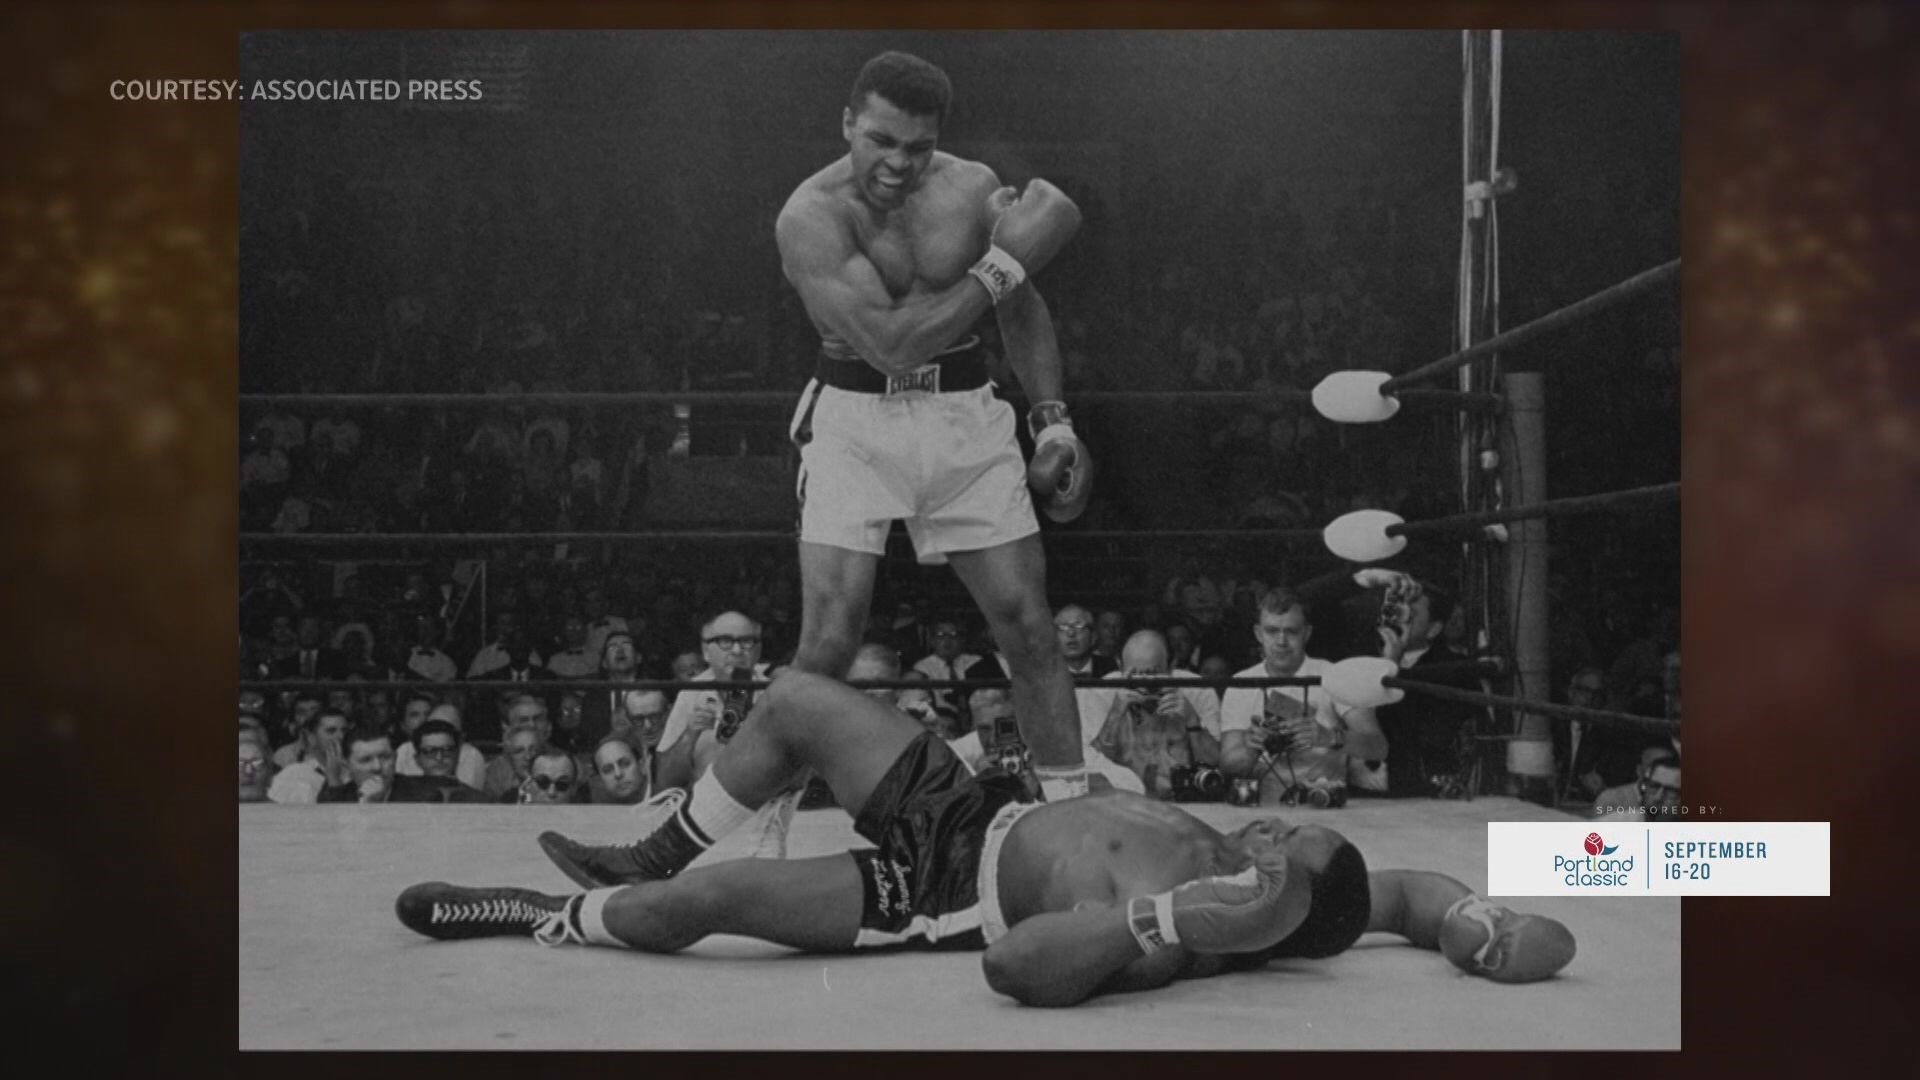 Boxer Muhammad Ali had an impact well beyond just the sports world -- he broke barriers.